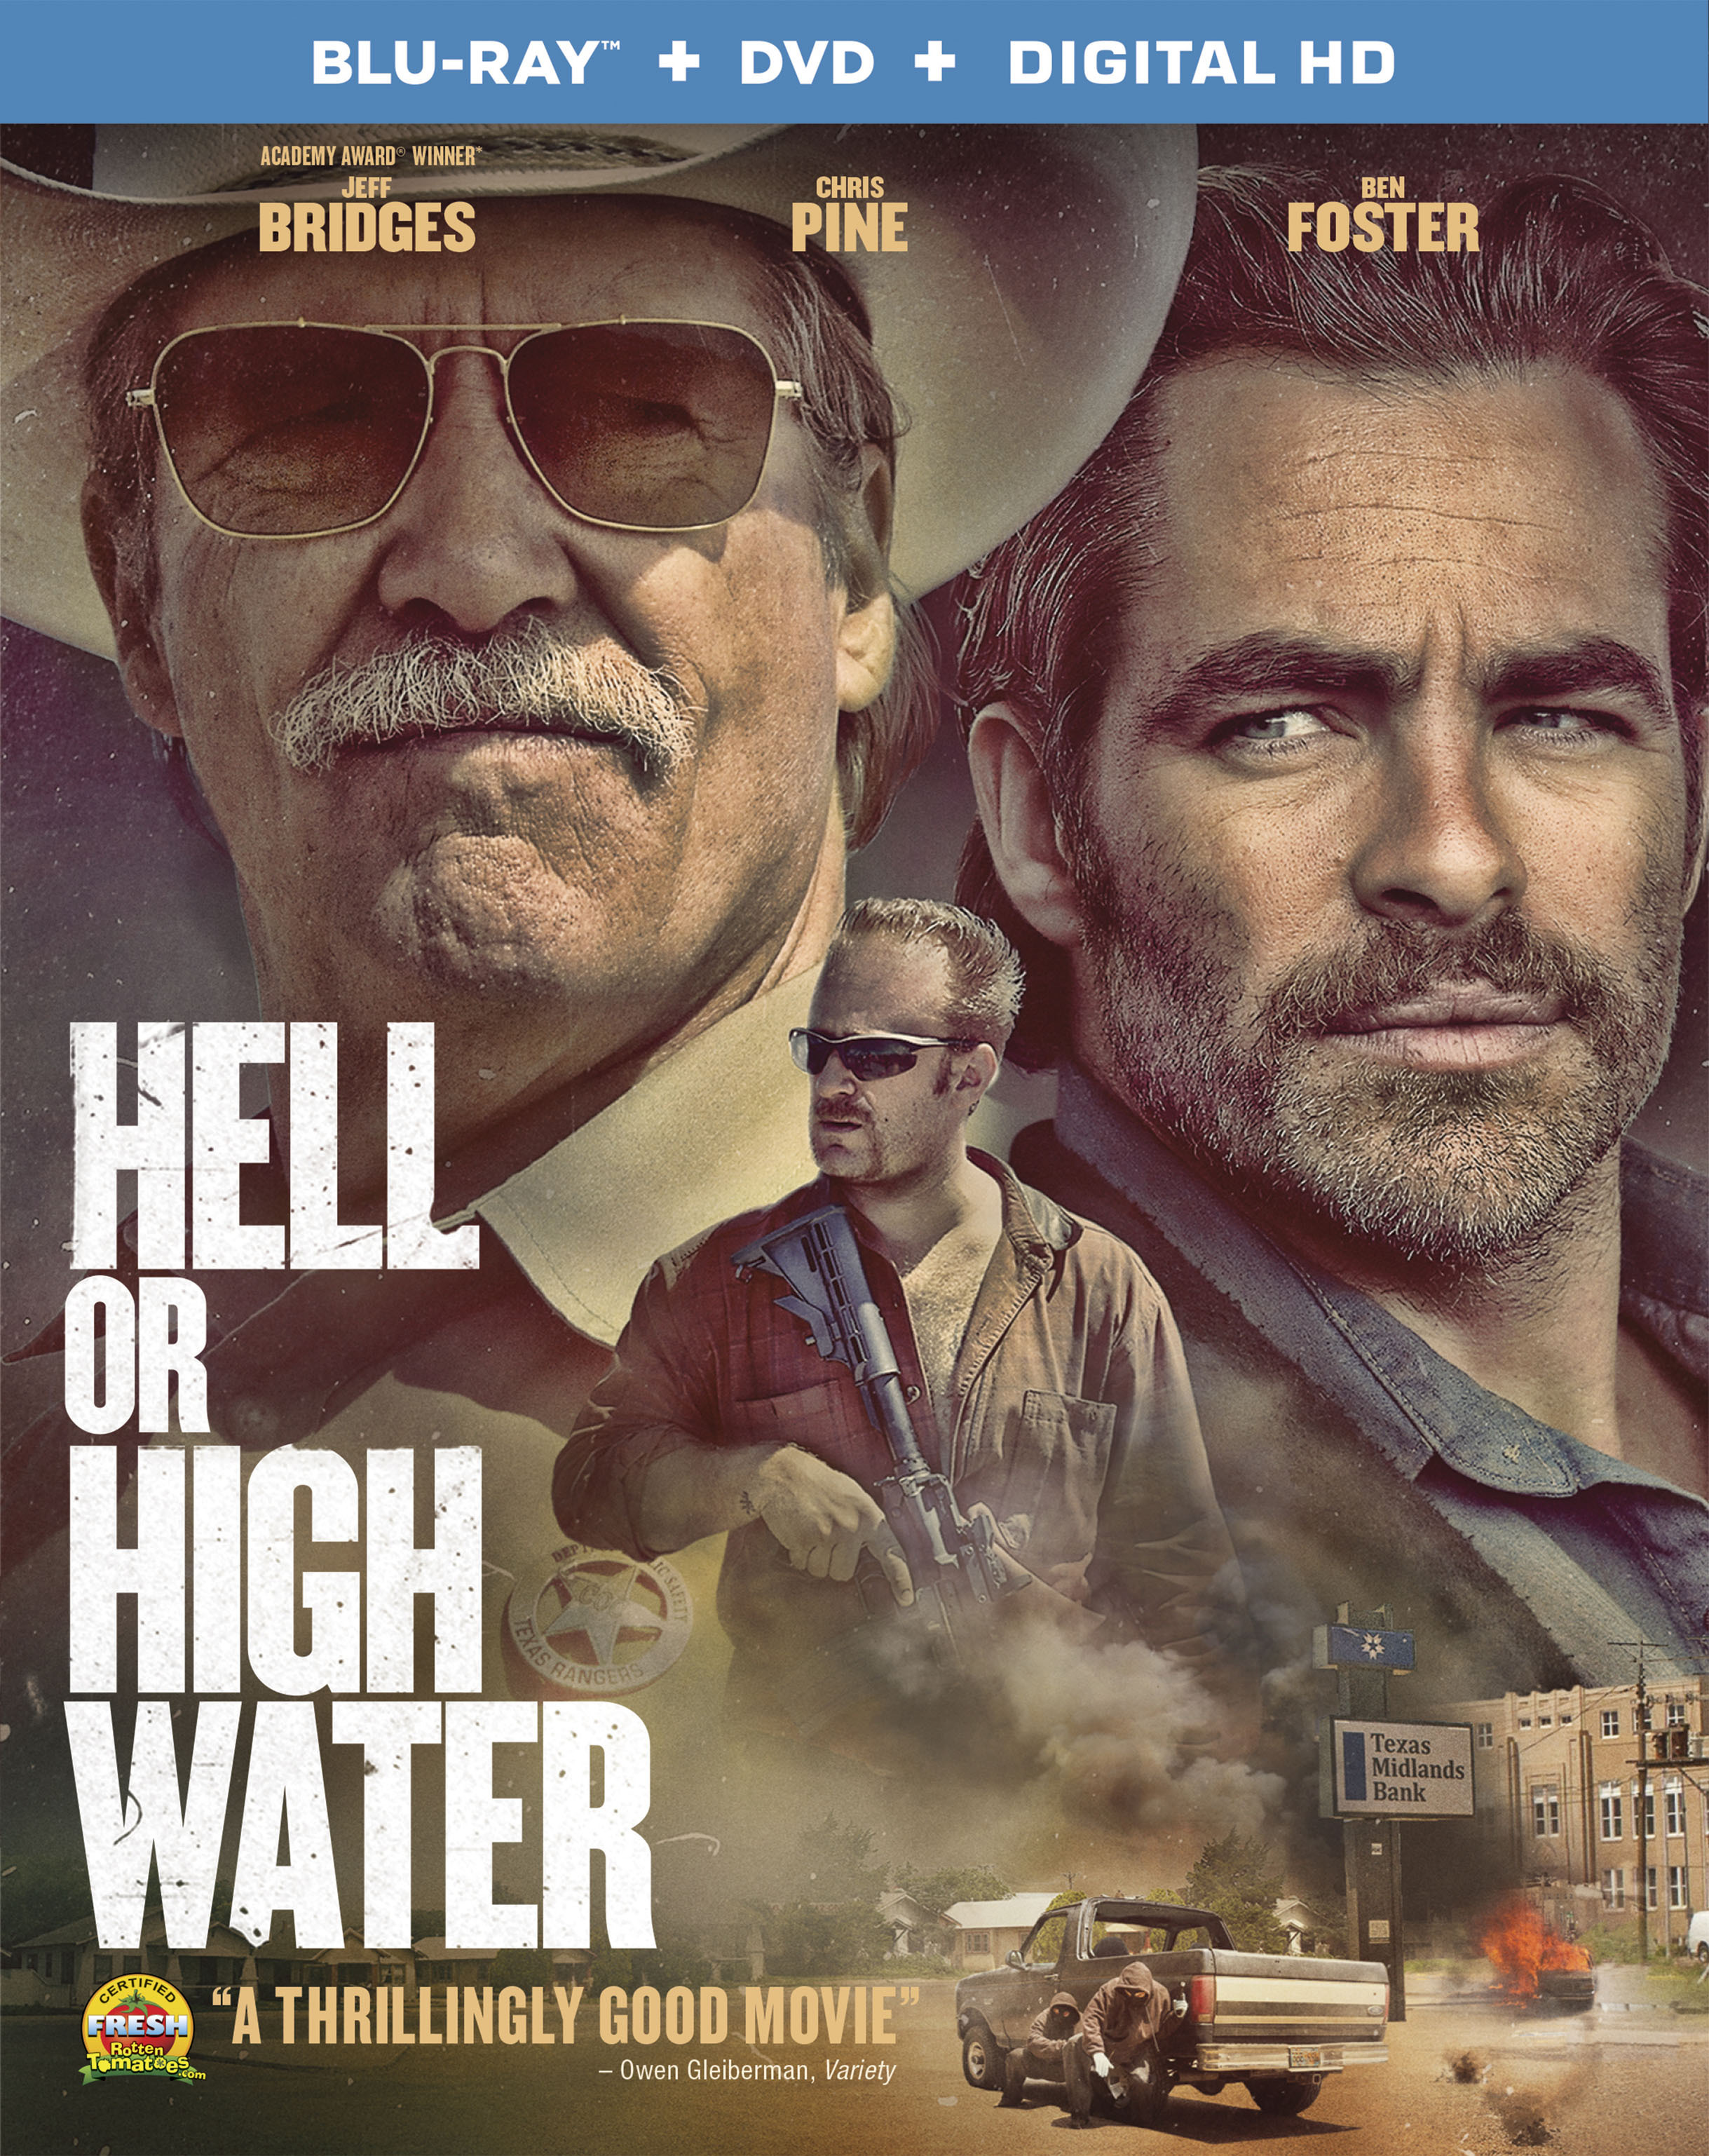 Hell Or High Water (with DVD) - Blu-ray [ 2016 ]  - Drama Movies On Blu-ray - Movies On GRUV